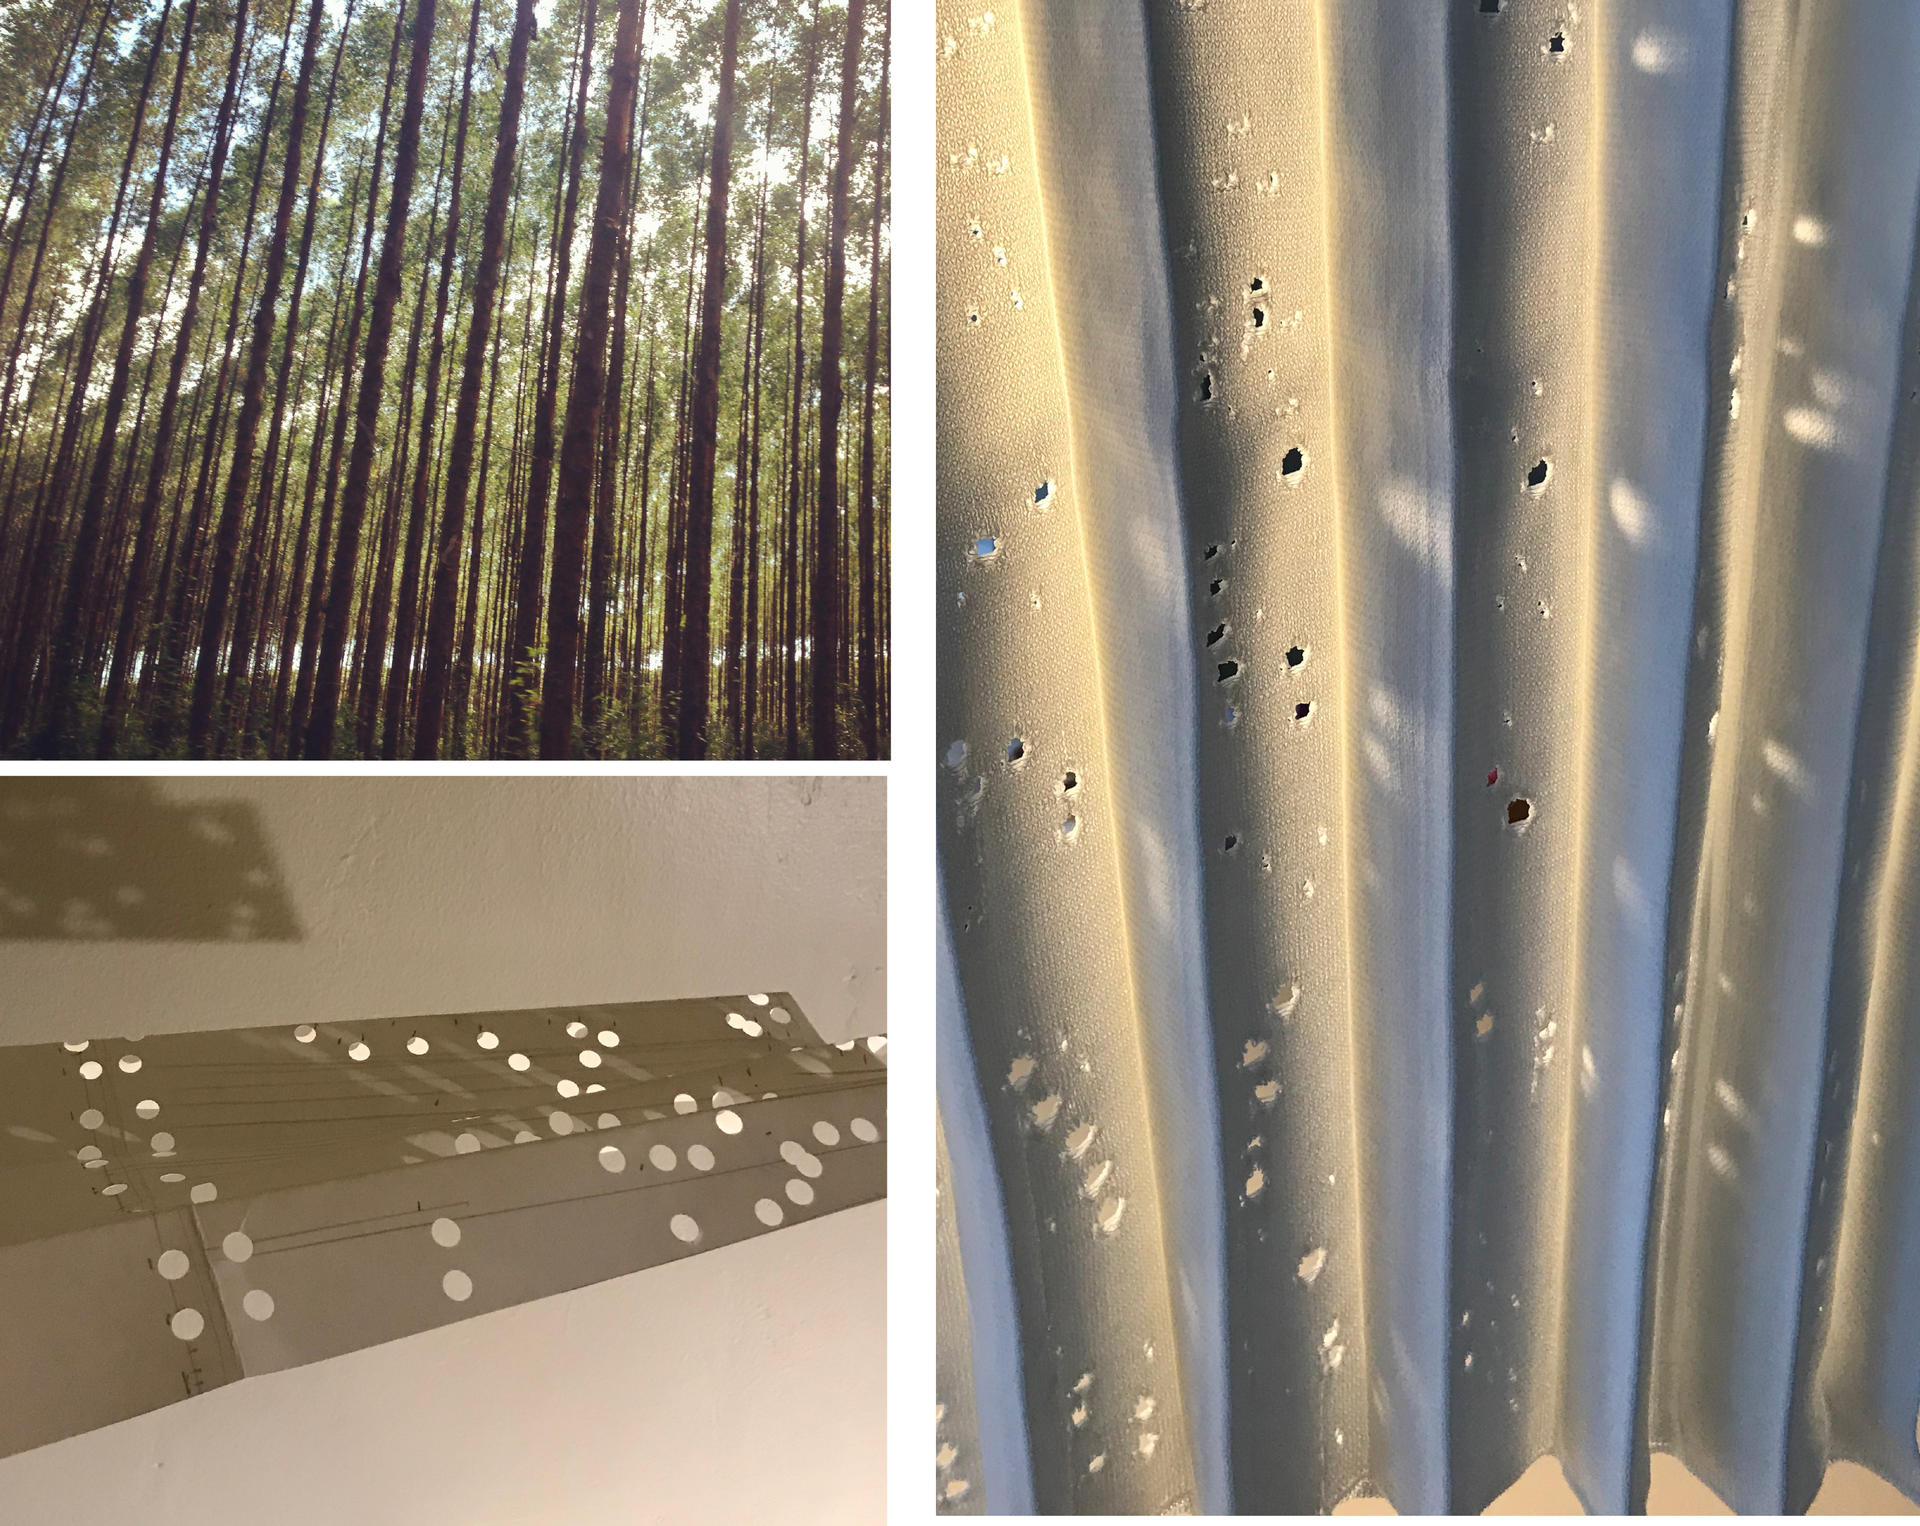 Photograph of a sun dappled forest, pleated paper mockup, and knitted fabric capturing a sun dappled effect.